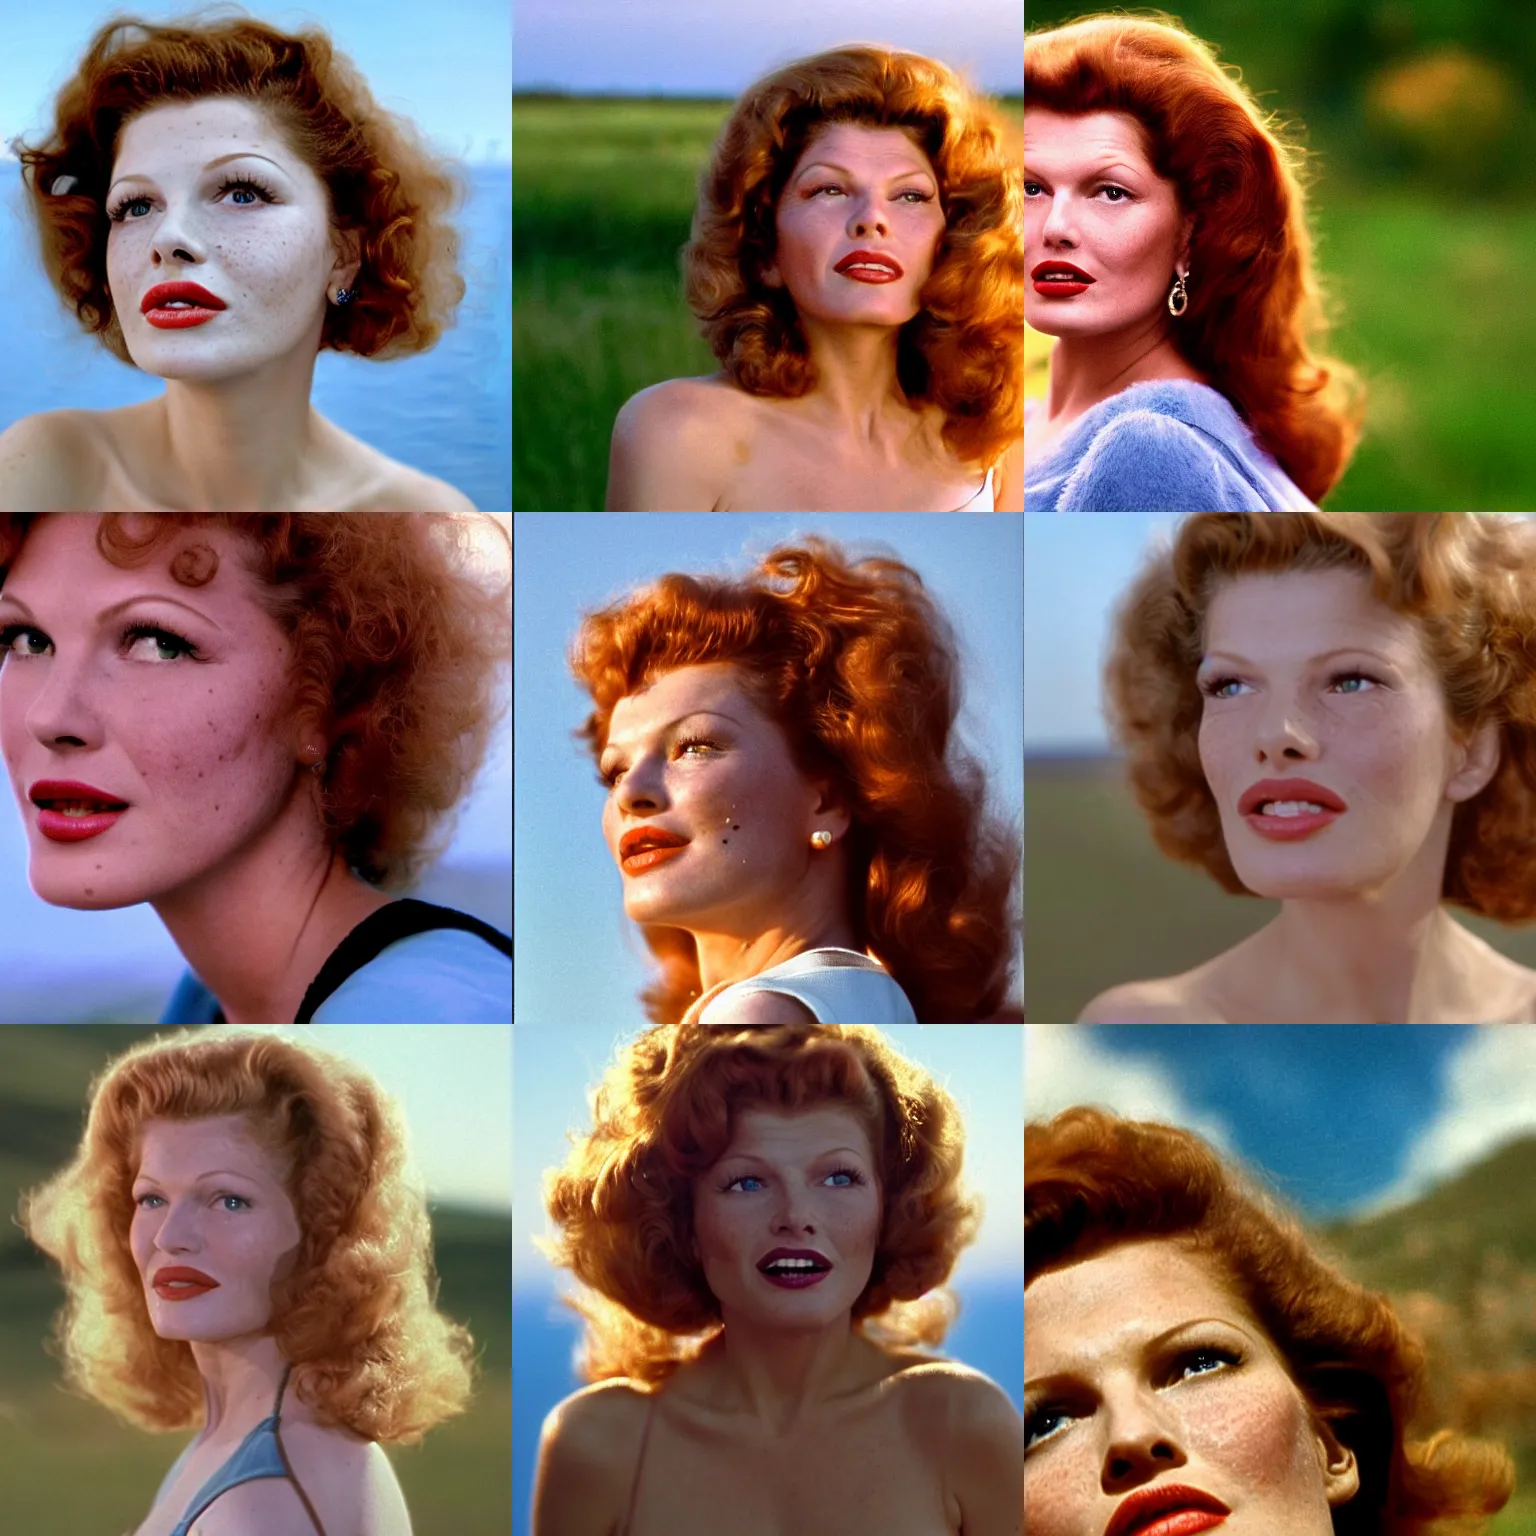 Prompt: natural 8 k close up shot from a 2 0 0 5 romantic comedy by sam mendes of rita hayworth with no makeup, freckles, natural skin, beauty spots and small lips. she stands and looks on the horizon with winds moving her hair. fuzzy blue sky in the background. small details, natural lighting, 8 5 mm lenses, sharp focus